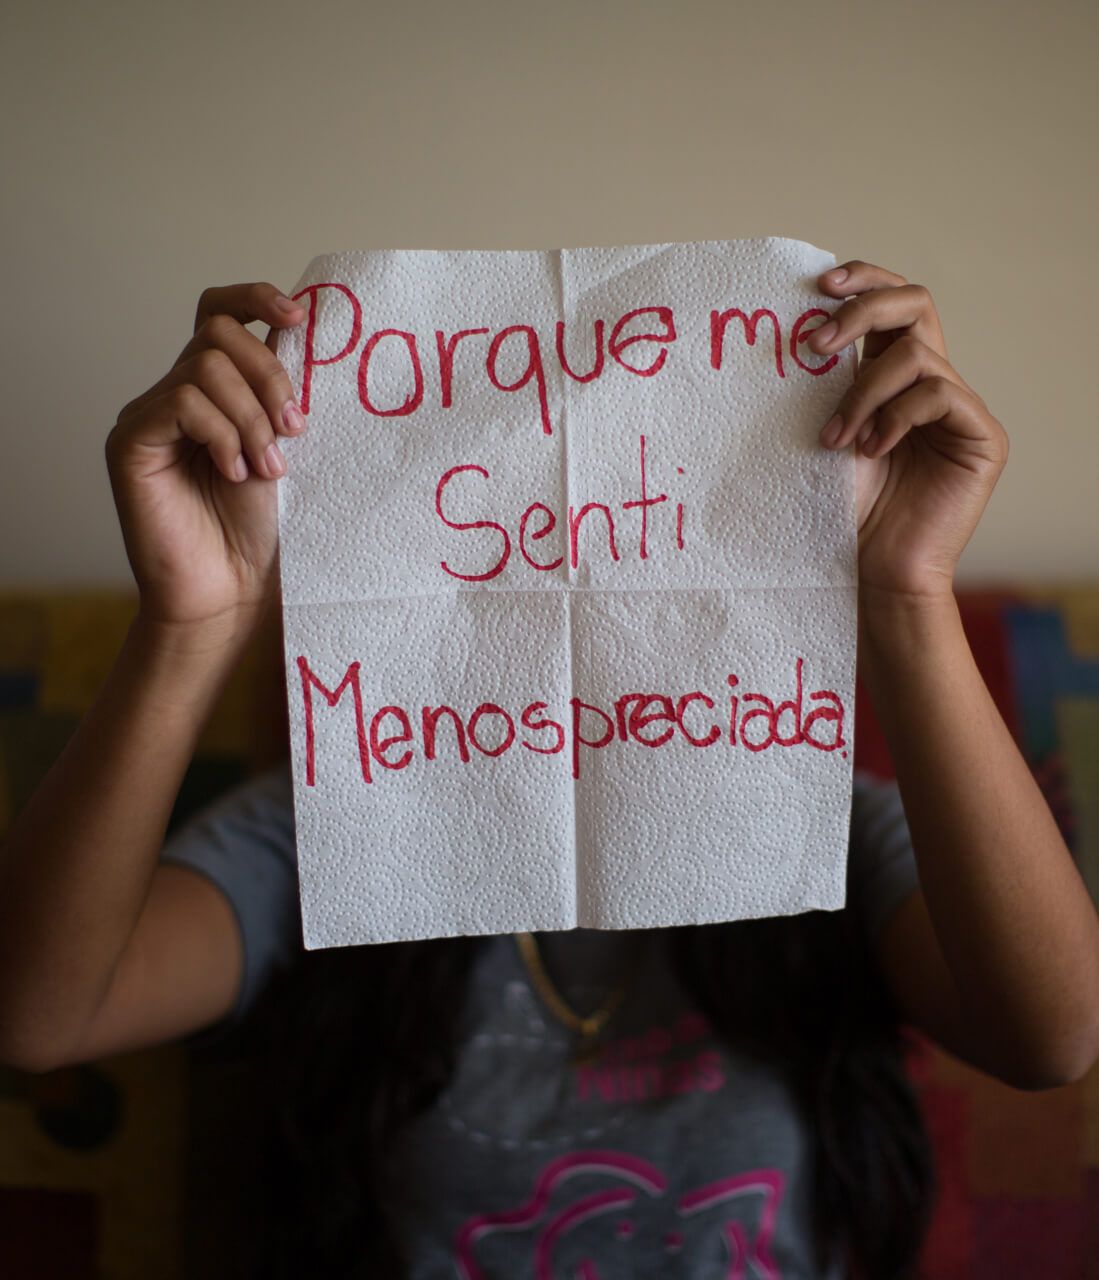 Carmen, 16.

The napkin reads: "because I felt disparaged." When she think about her childhood, she remembers abuse and spending days alone, in hiding. Her dad was a drug addict who beat her mother. One day at school someone told her that hurting herself would no longer cause pain. "I did not feel anything. I learned that hurting myself did not solve anything, that I should seek help from someone who could give me good advice," she recalls. And she did.

Image by Almudena Toral. El Salvador, 2018.